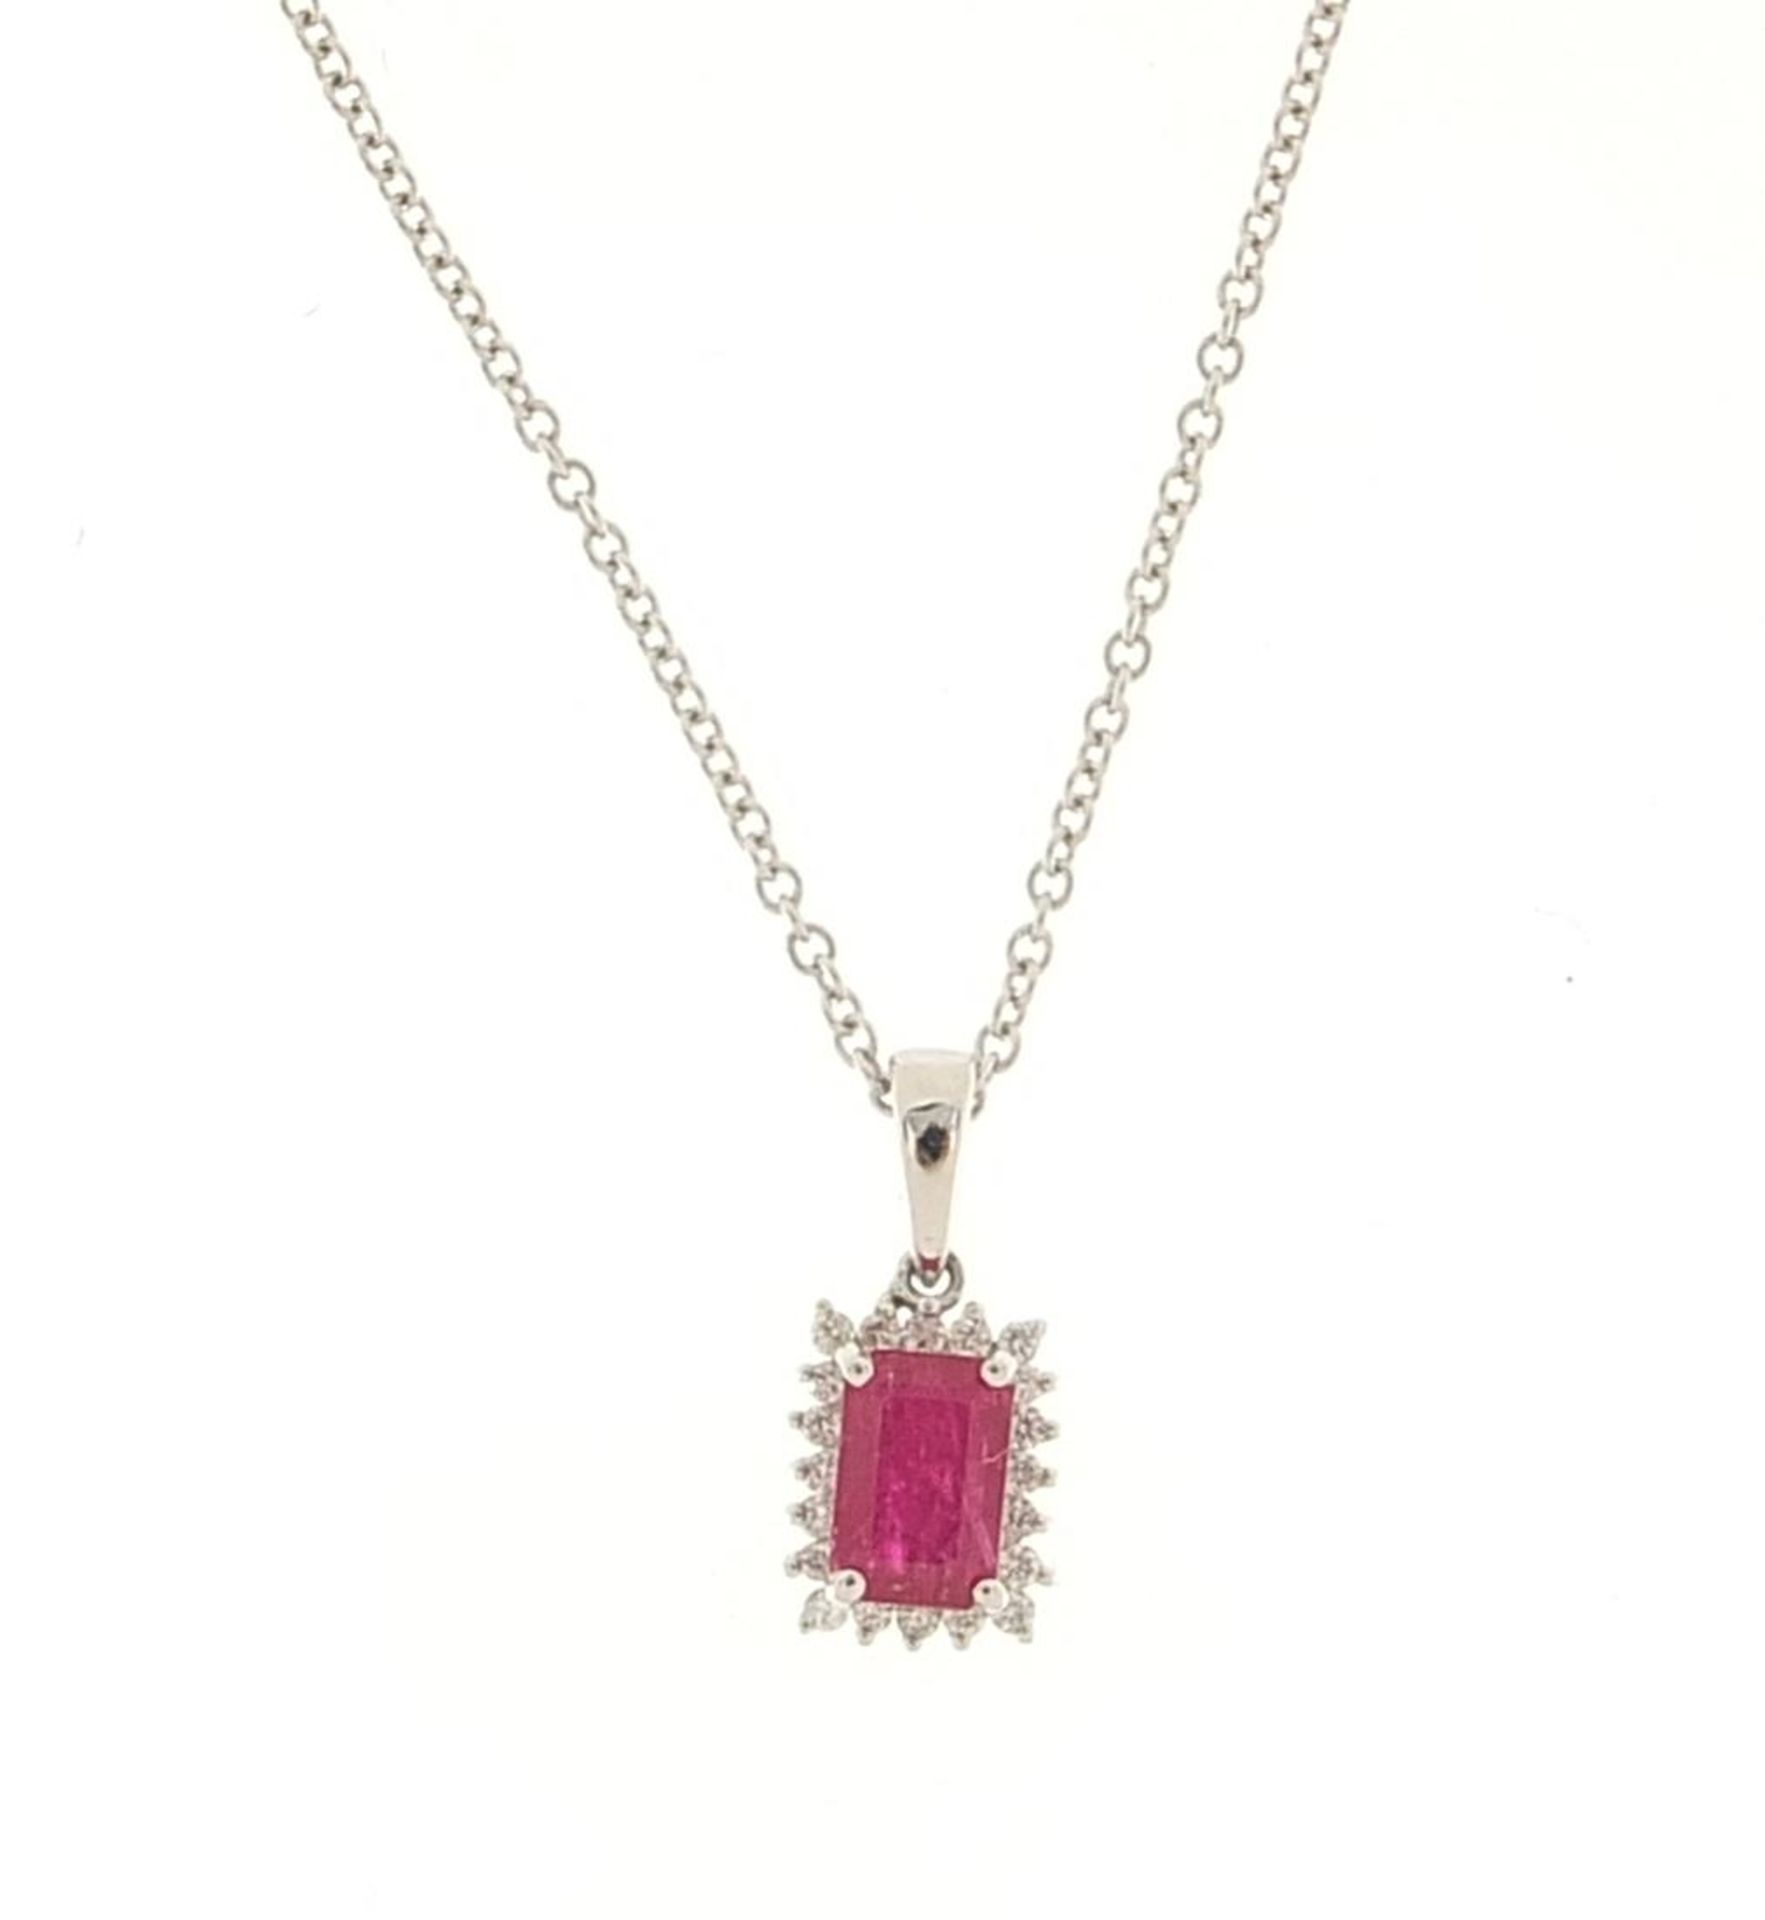 9ct white gold ruby and diamond cluster pendant on a 9ct white gold necklace, 1.5cm high and 42cm in